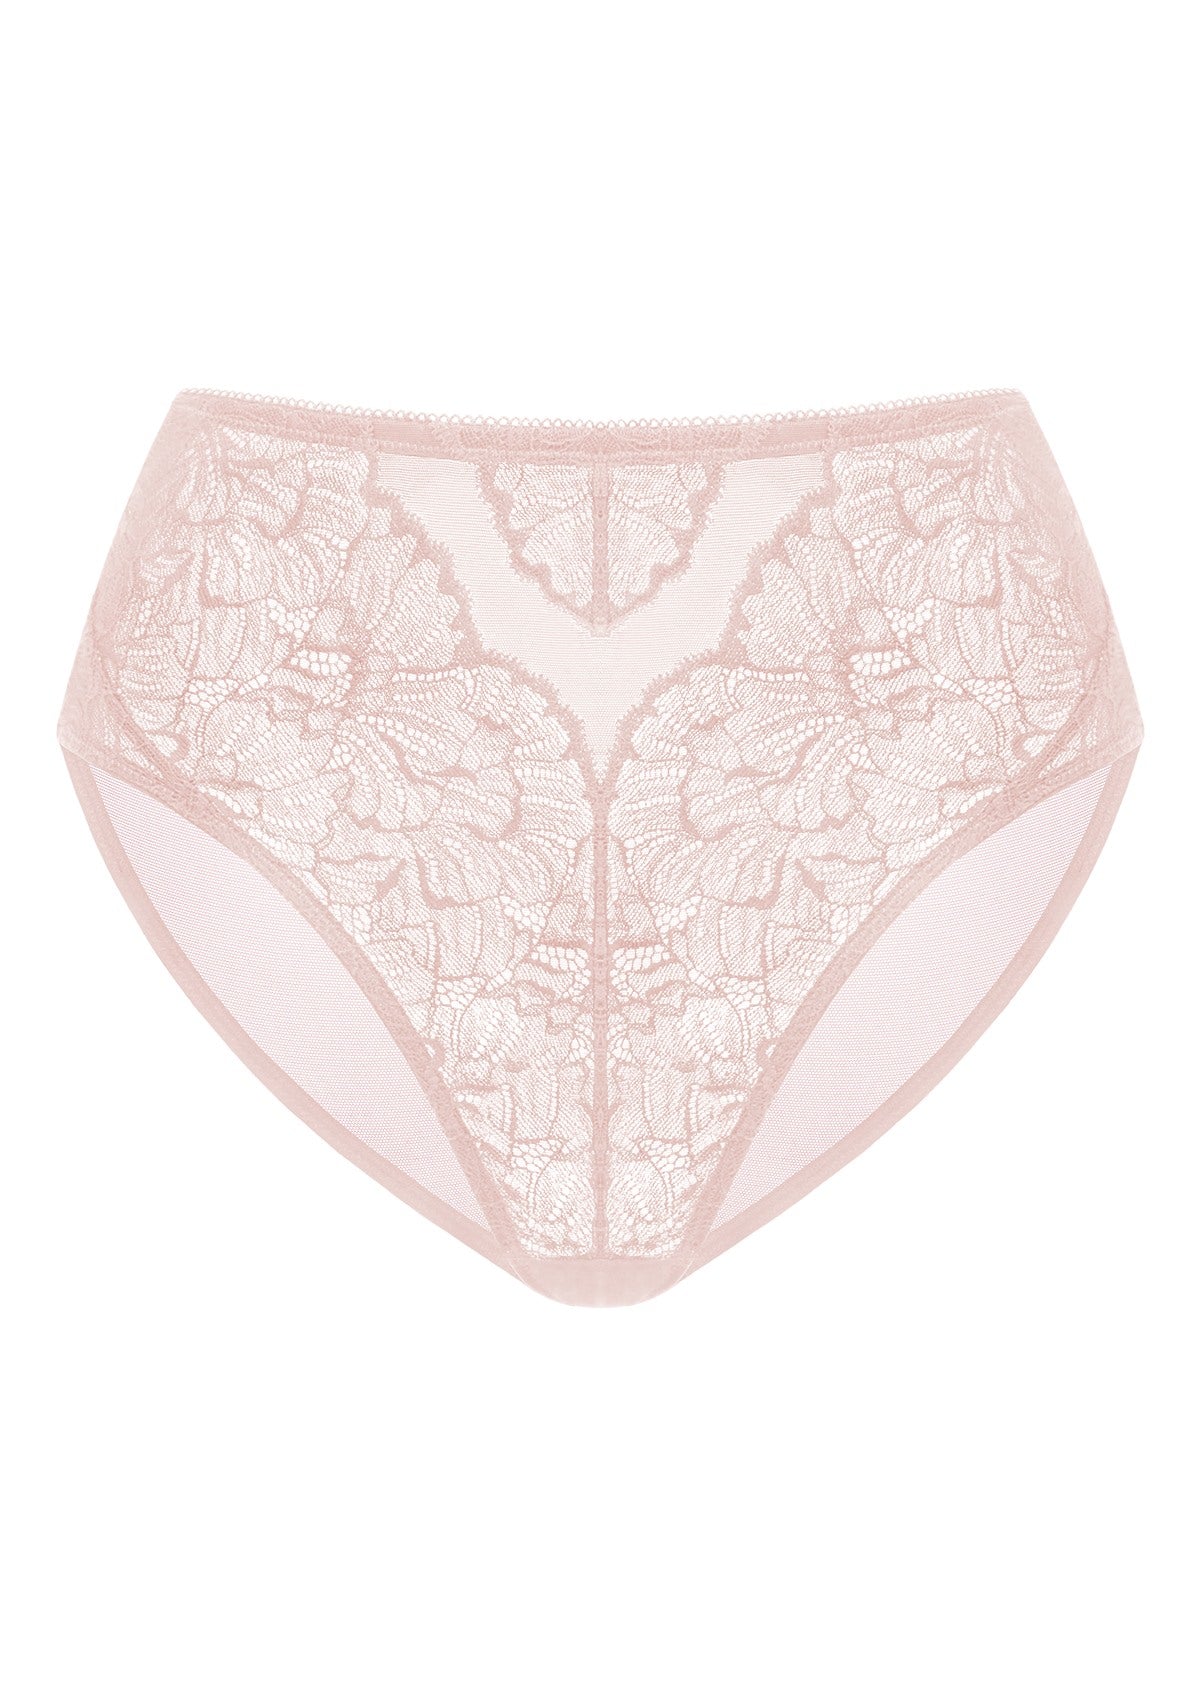 HSIA Blossom High-Rise Floral Lacy Panty-Comfort In Style - M / Dusty Peach